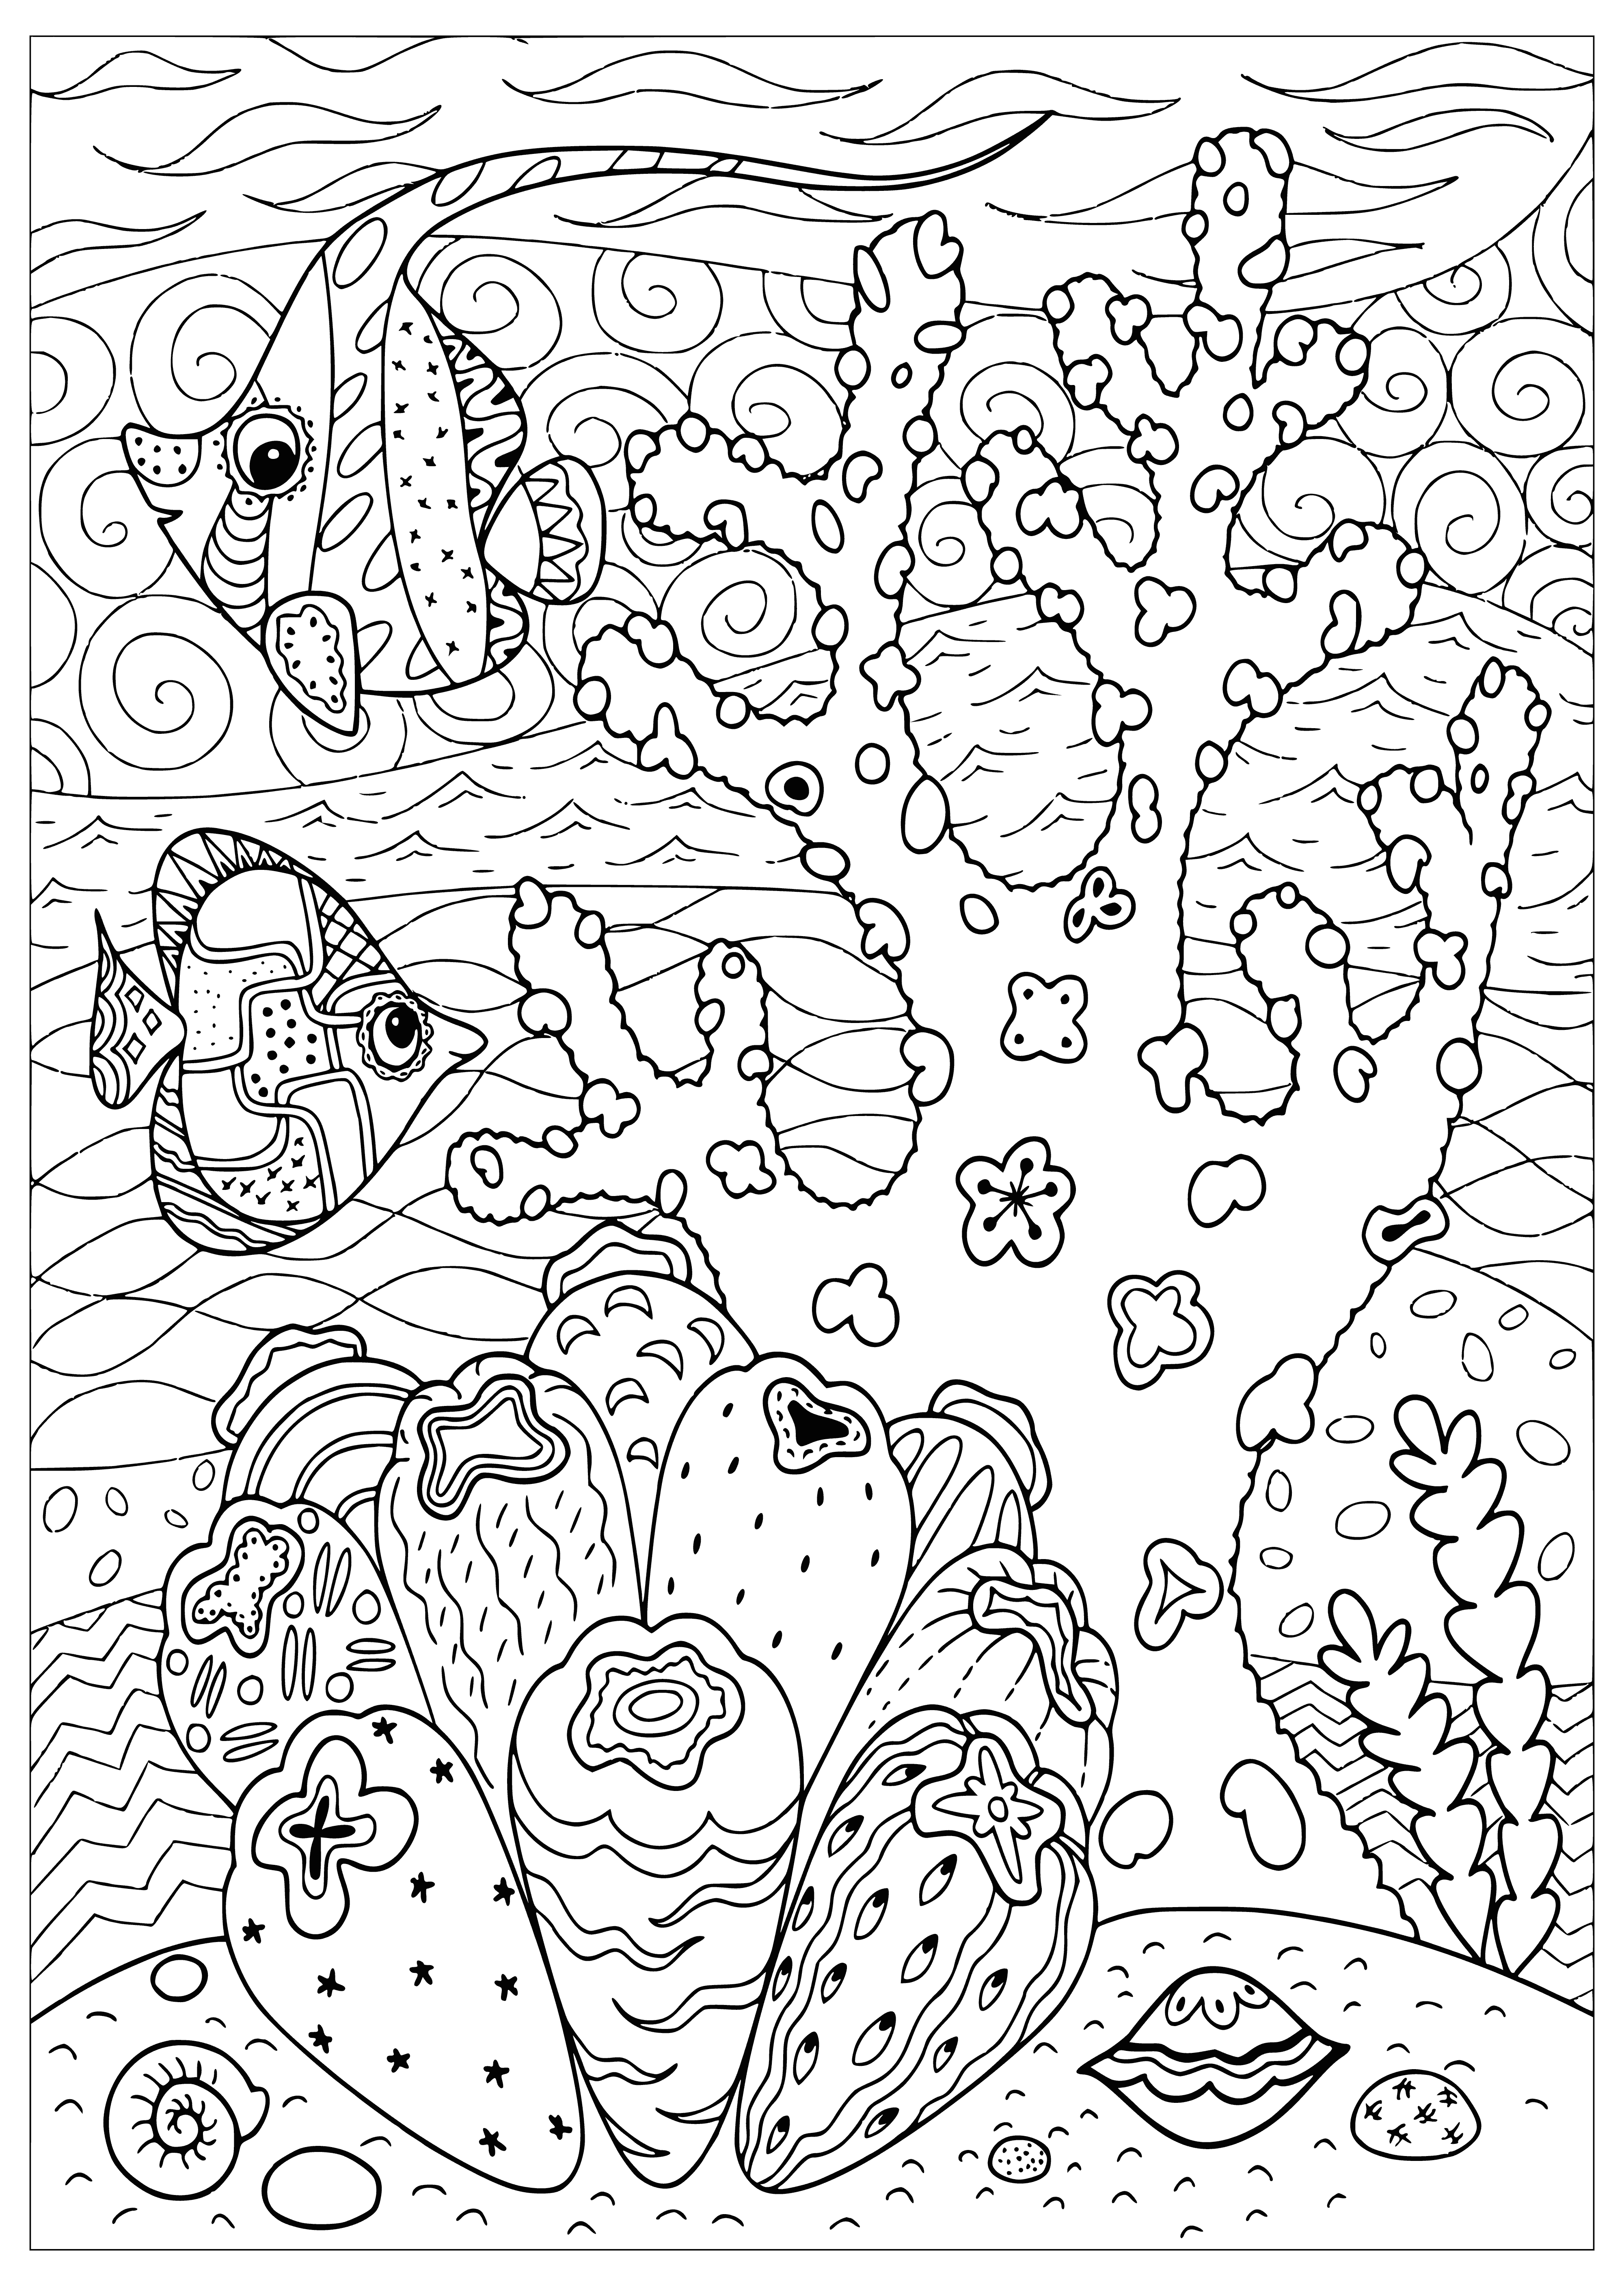 Fishes in a coral reef coloring page